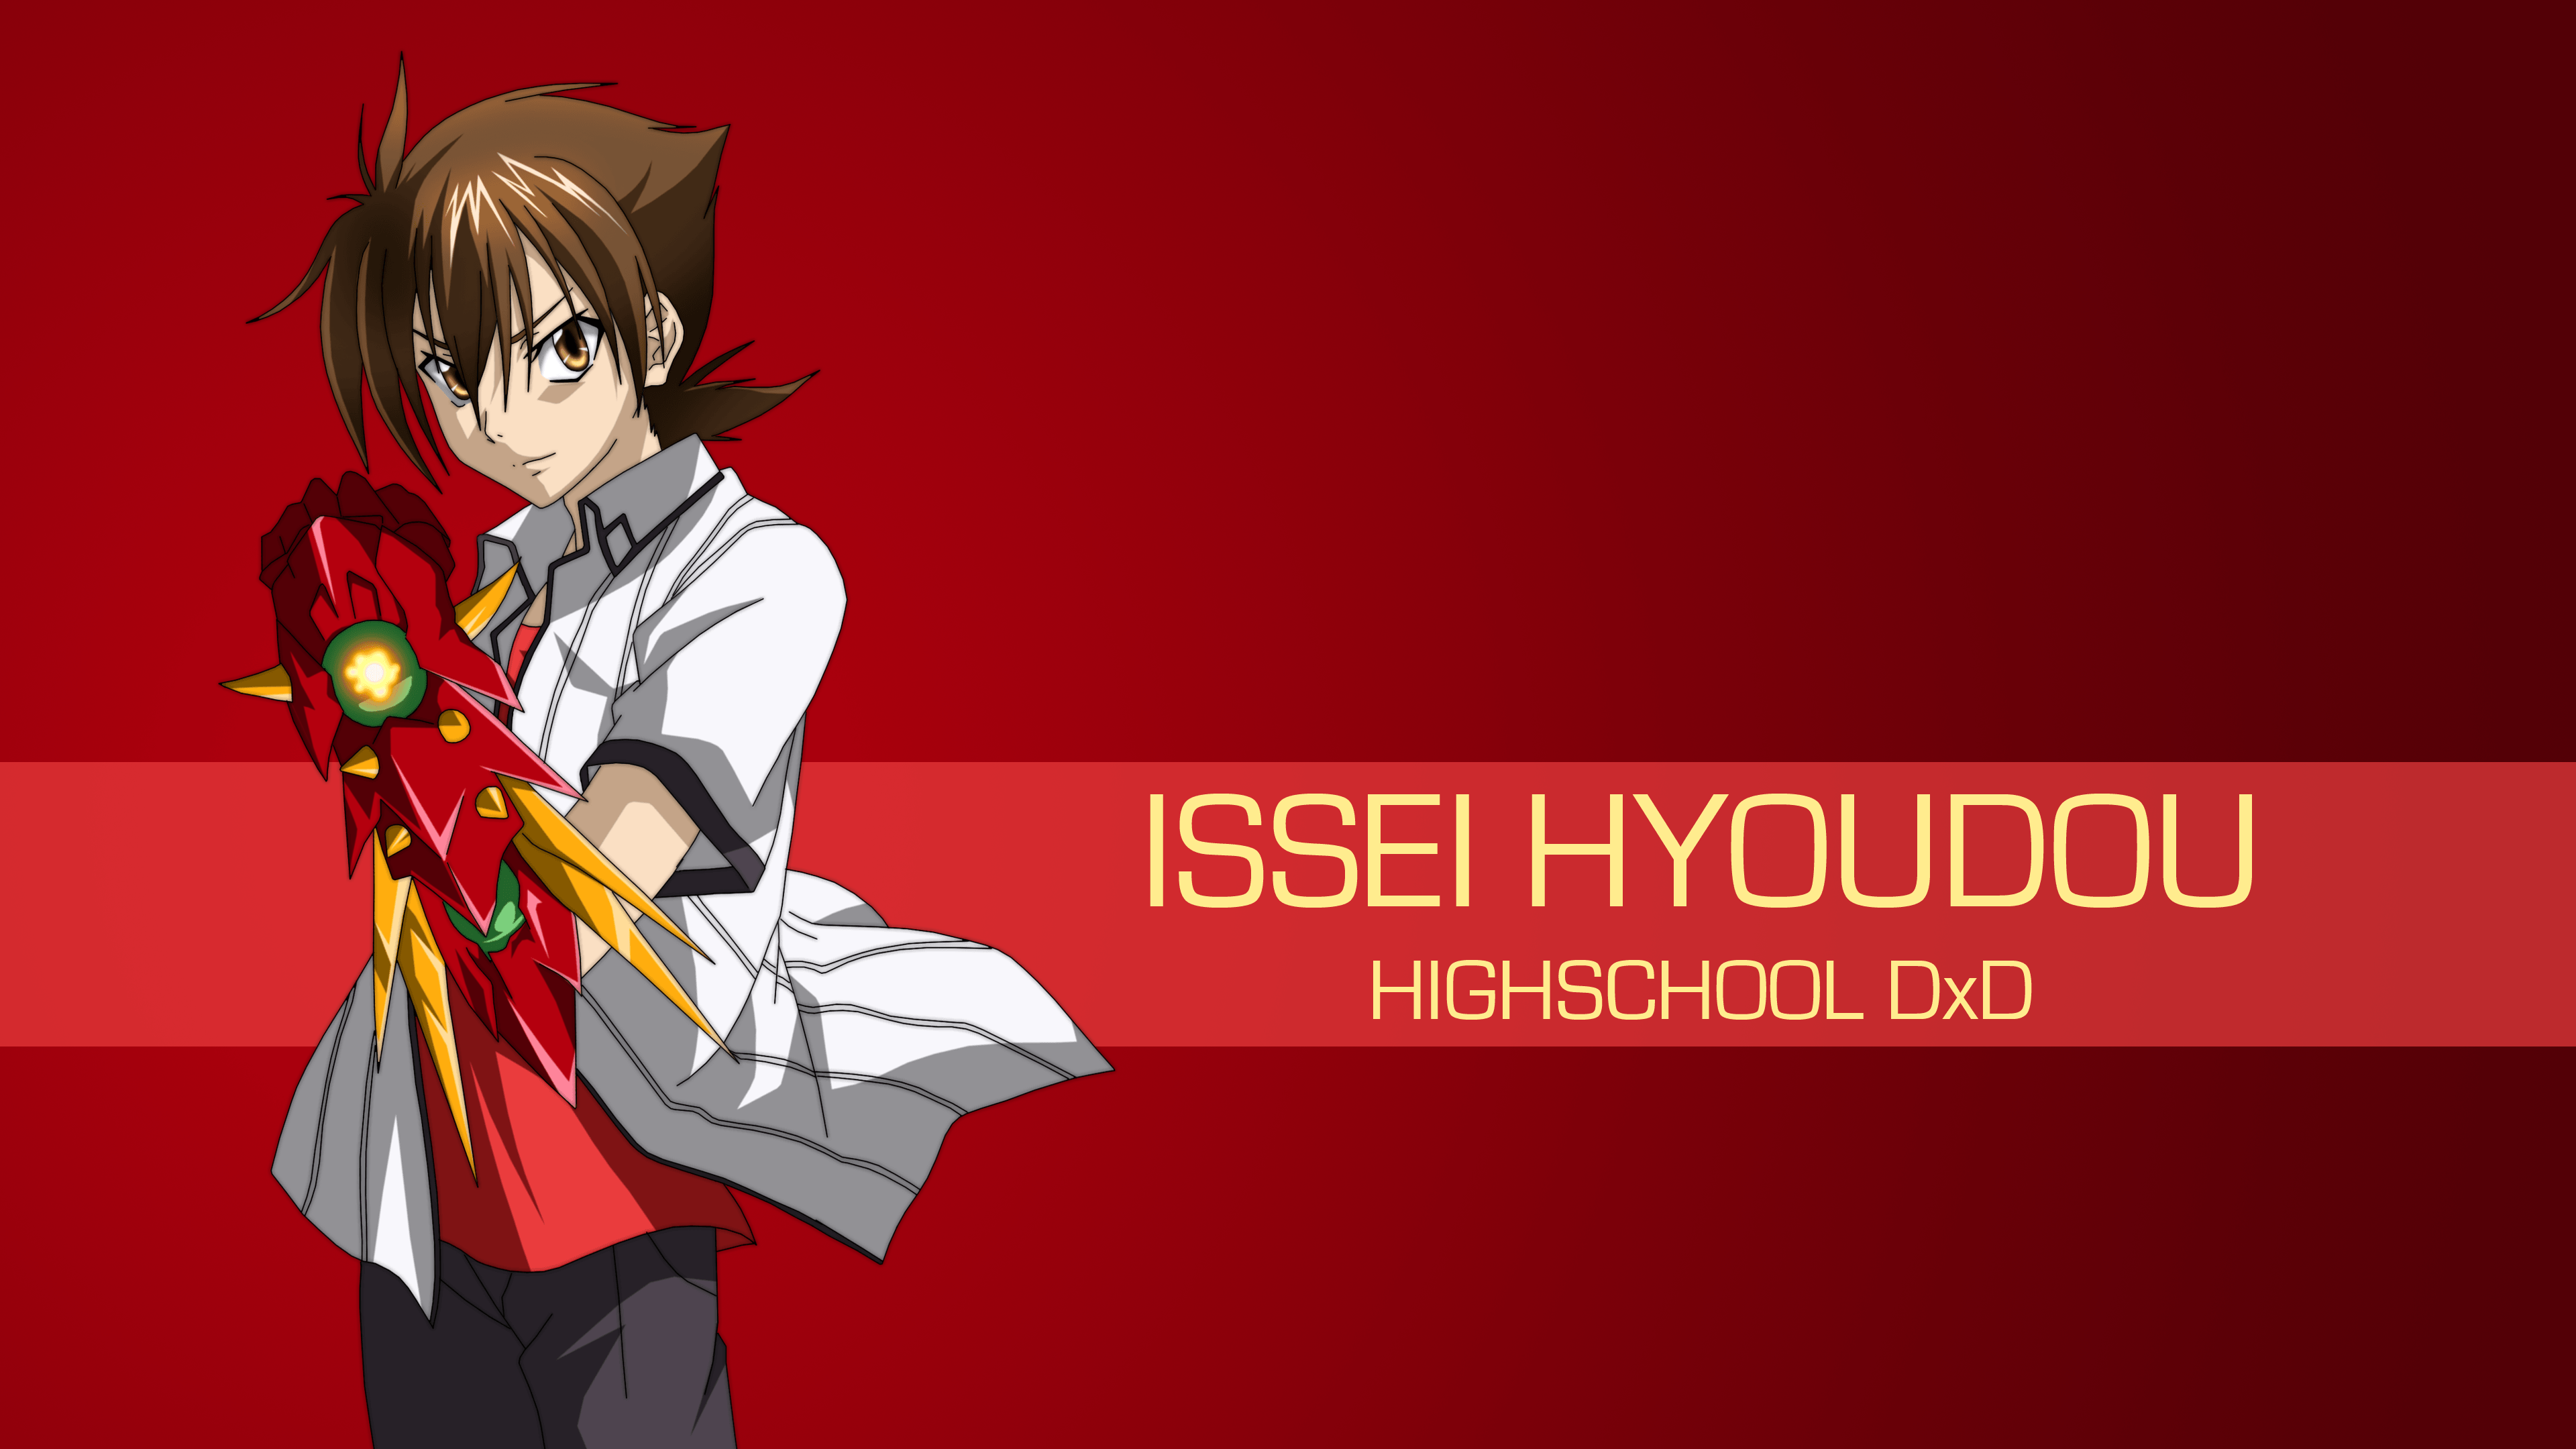 Download Image Follow Issei Hyoudou on incredible adventures in